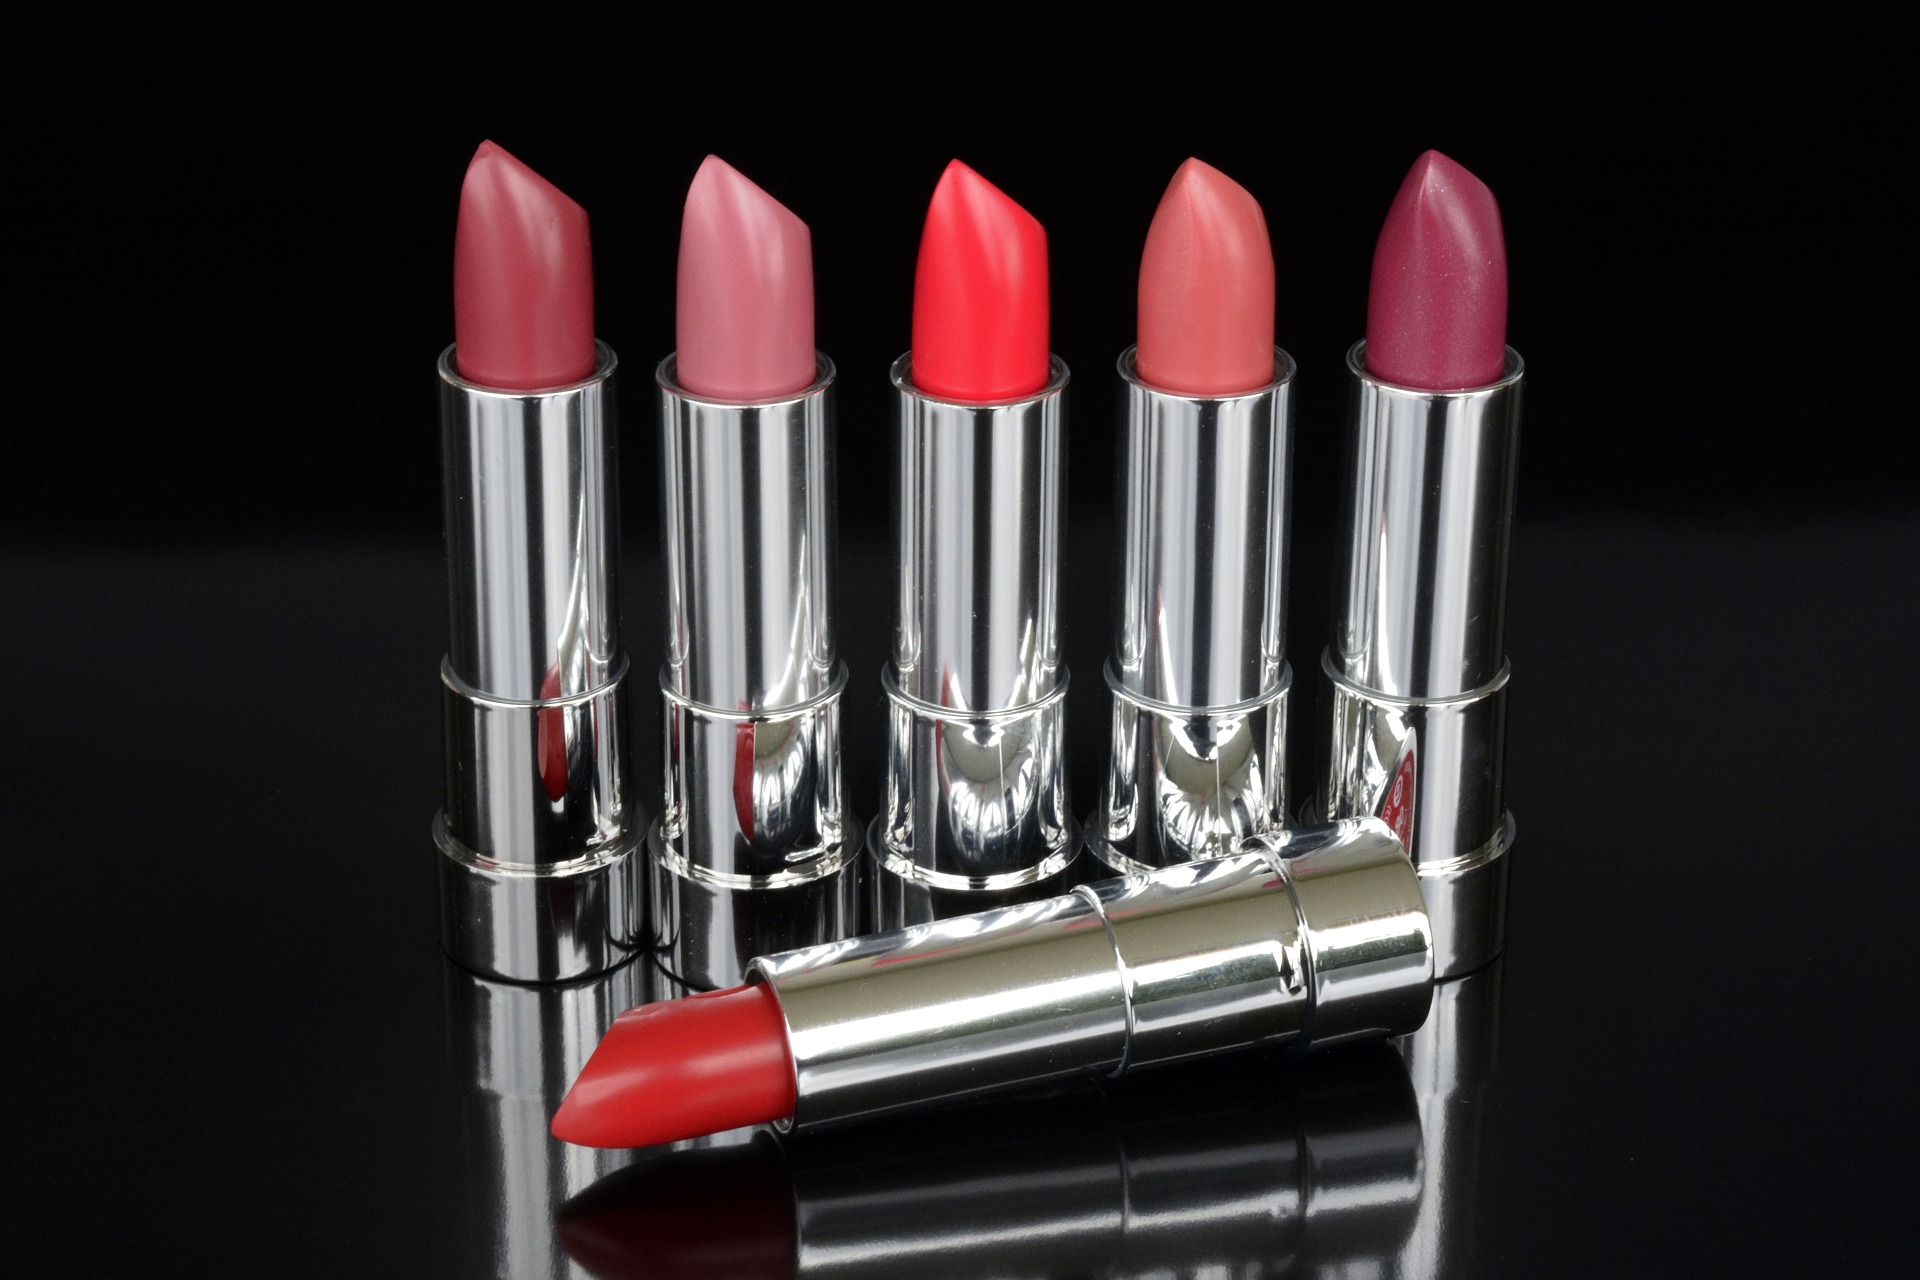 Lipsticks in different colors